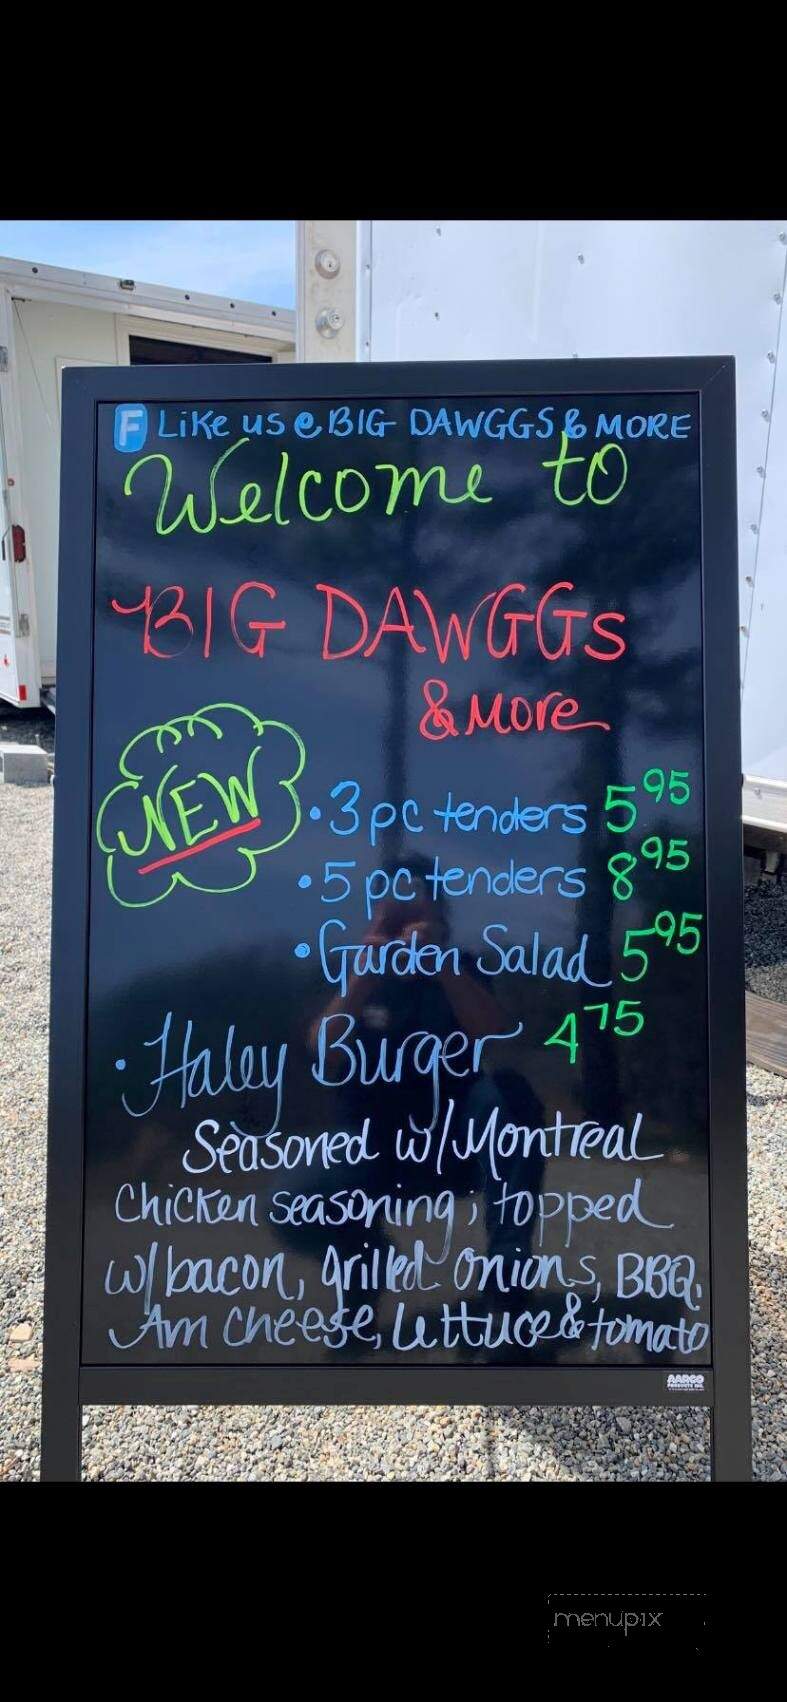 Big Dawggs - Griswold, CT